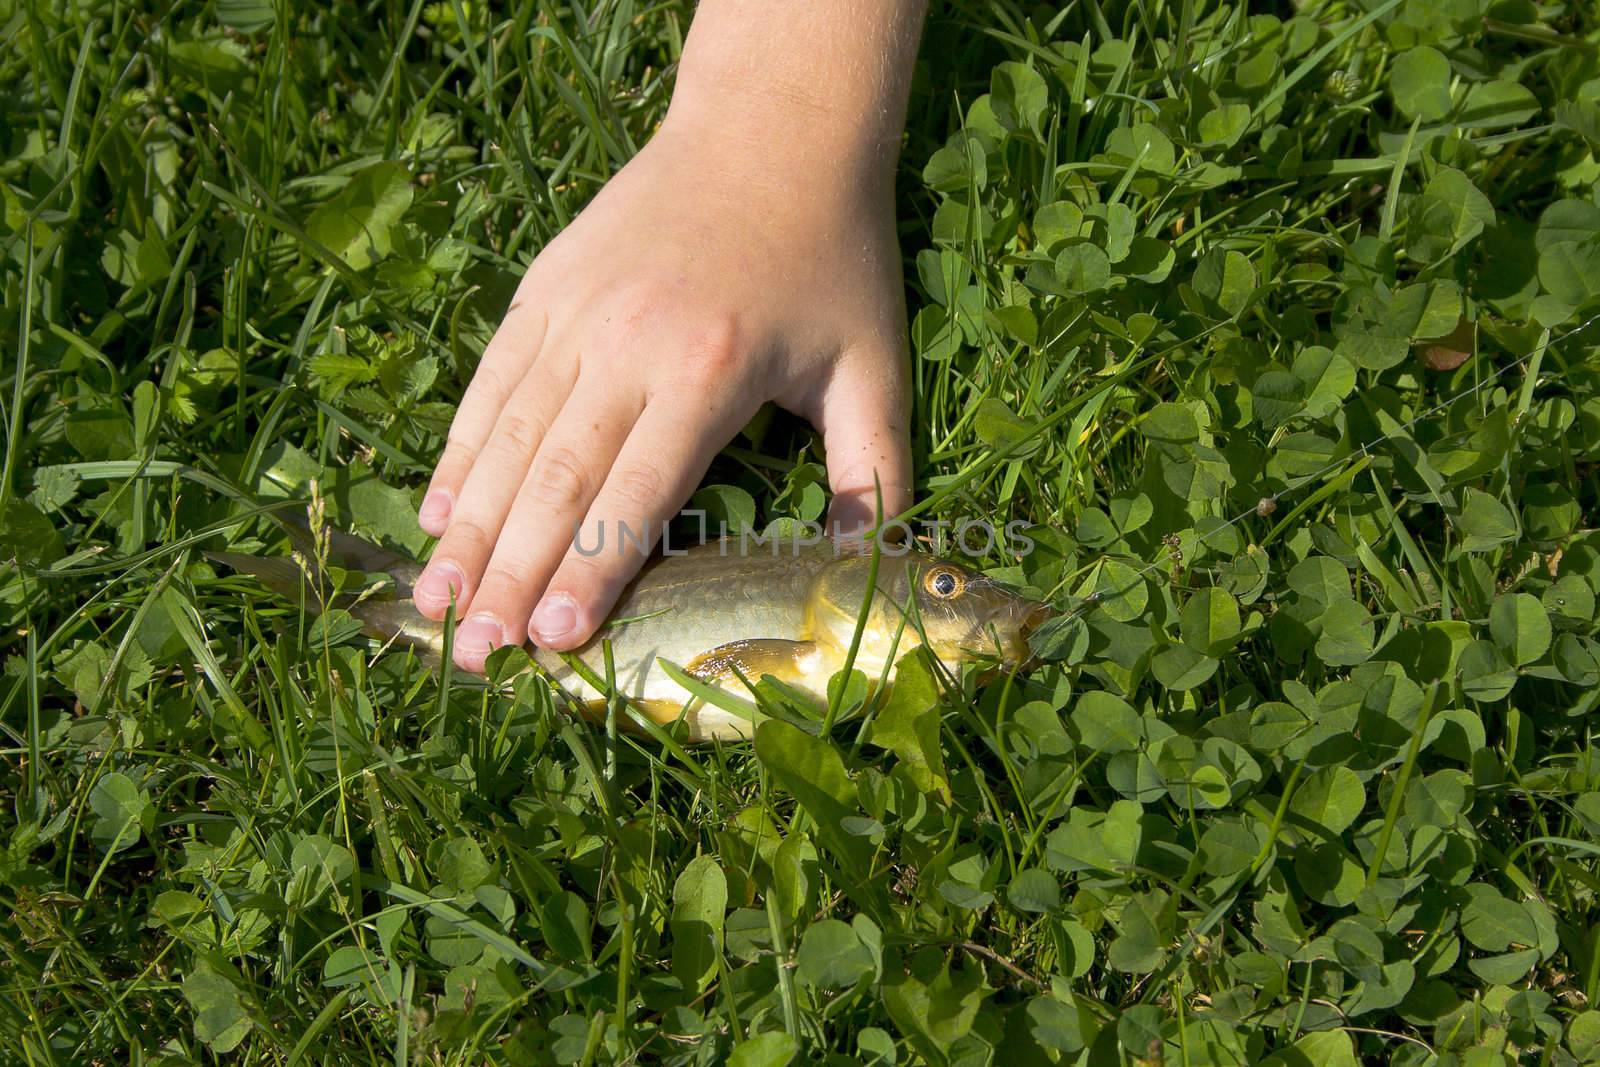 Fish on the grass